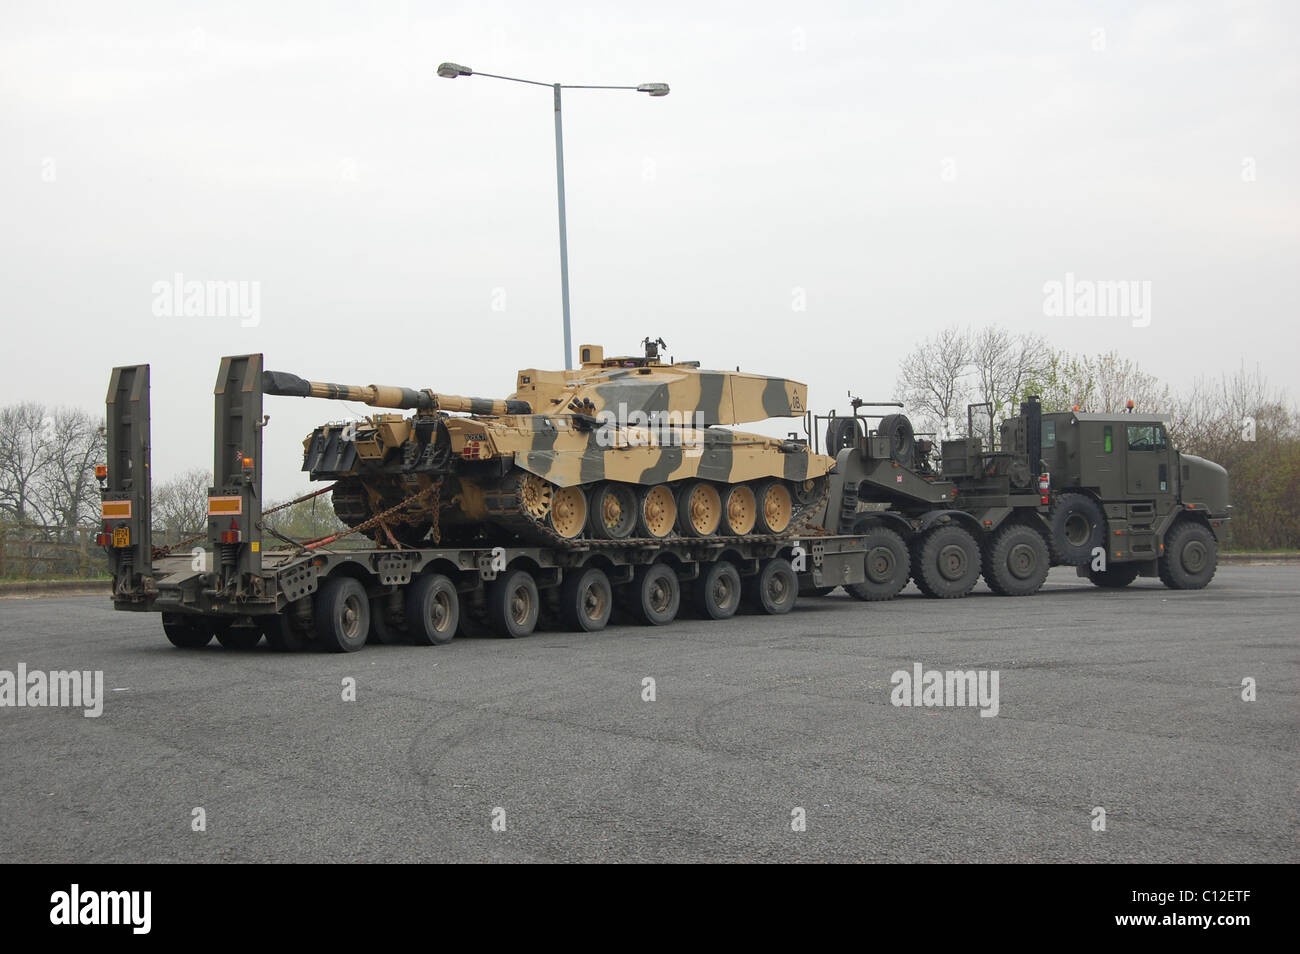 The Heavy Equipment Transport System (HETS) is a military logistics vehicle used to transport, deploy, and evacuate tanks, armou Stock Photo